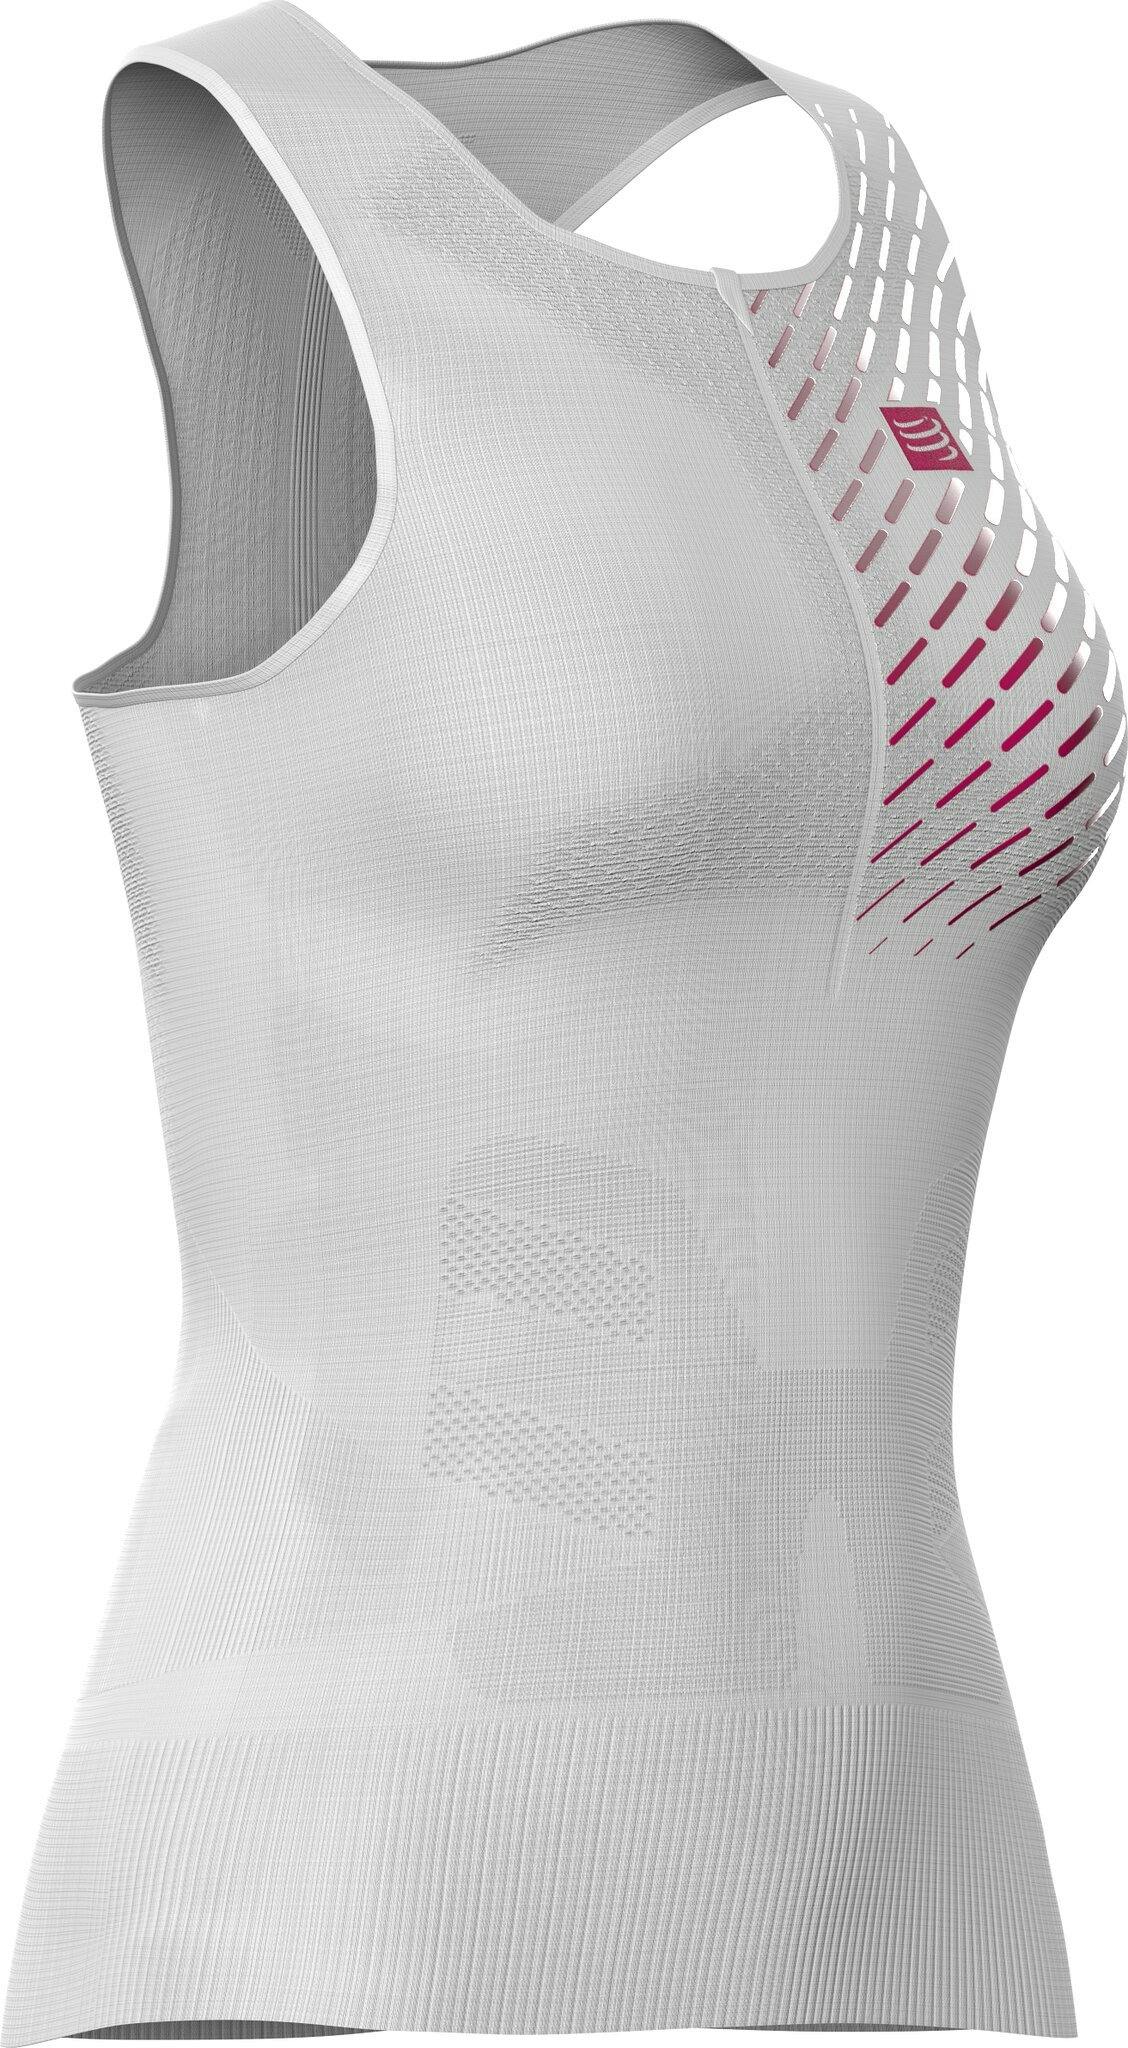 Product image for Trail Running Ultra Tank Top V2 - Women's